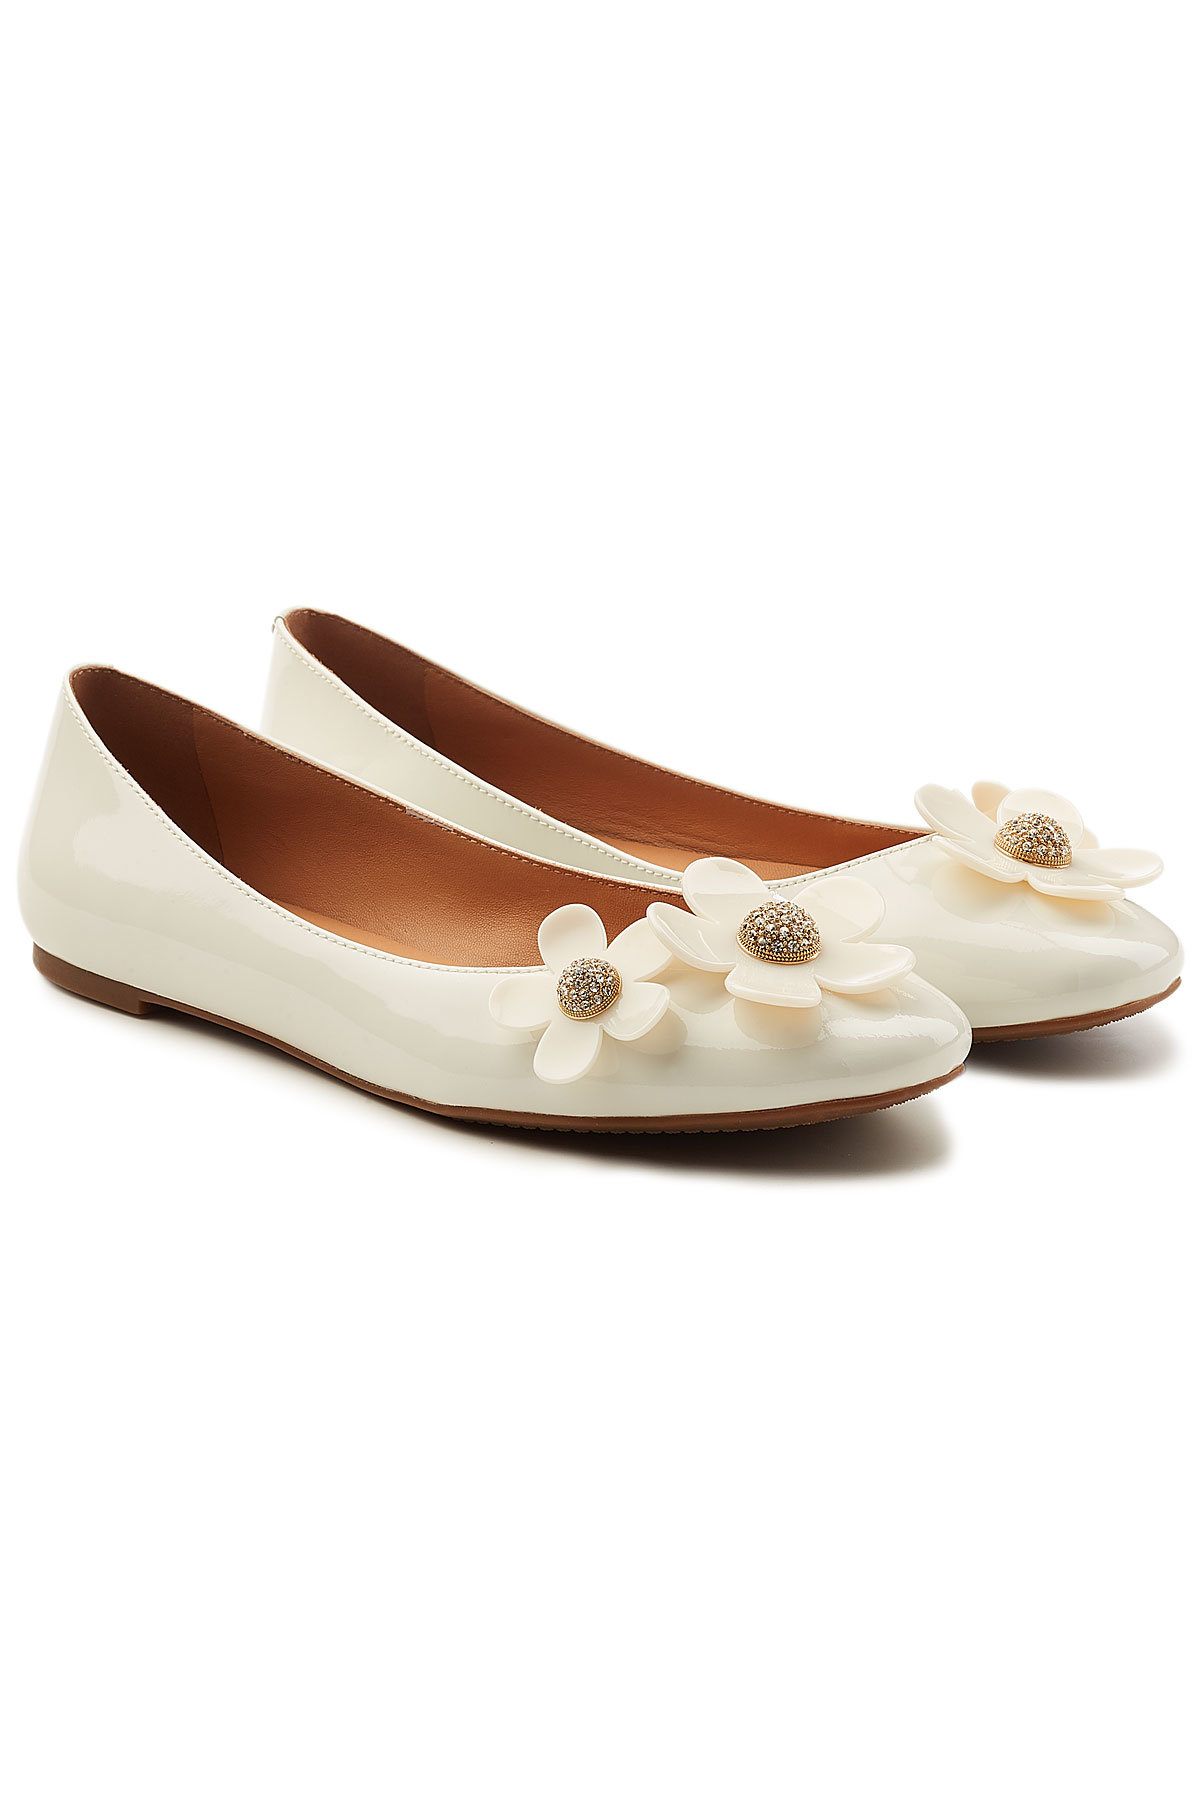 Daisy Patent Leather Ballerinas by Marc Jacobs